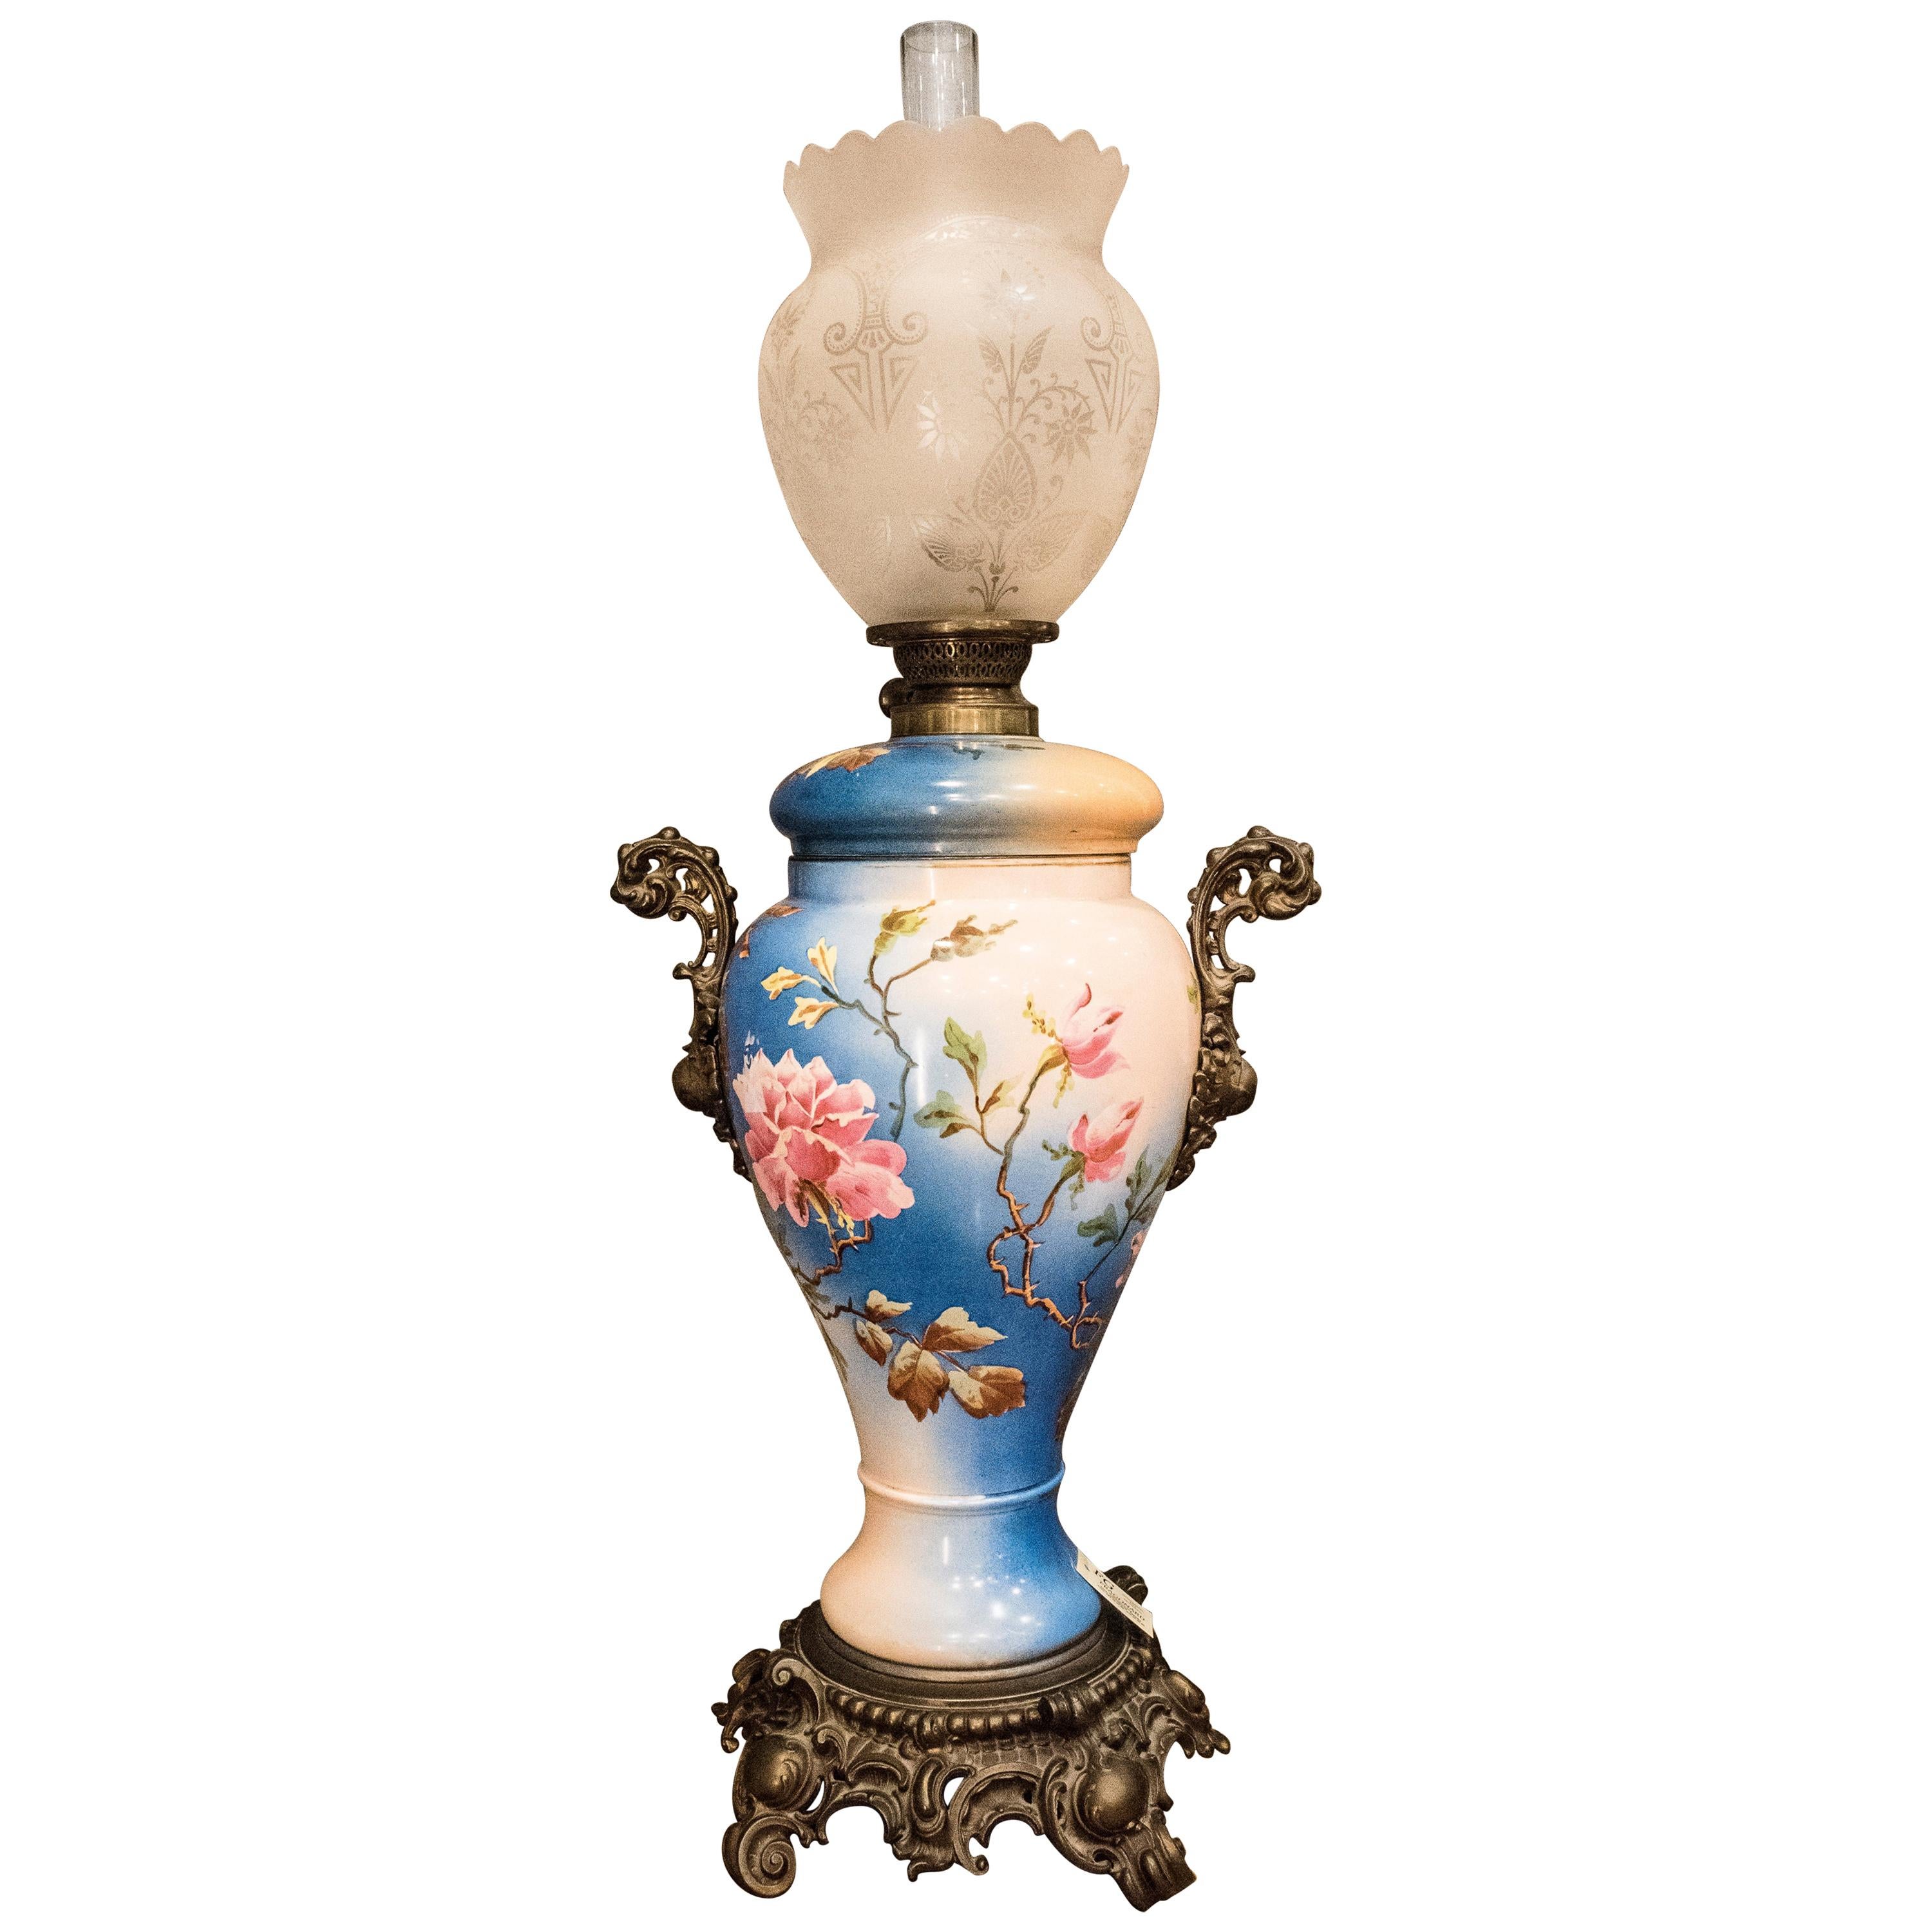 Napoleon III Gas lamp Turquoise and Pink Floral French Mayolique  "Quinque"